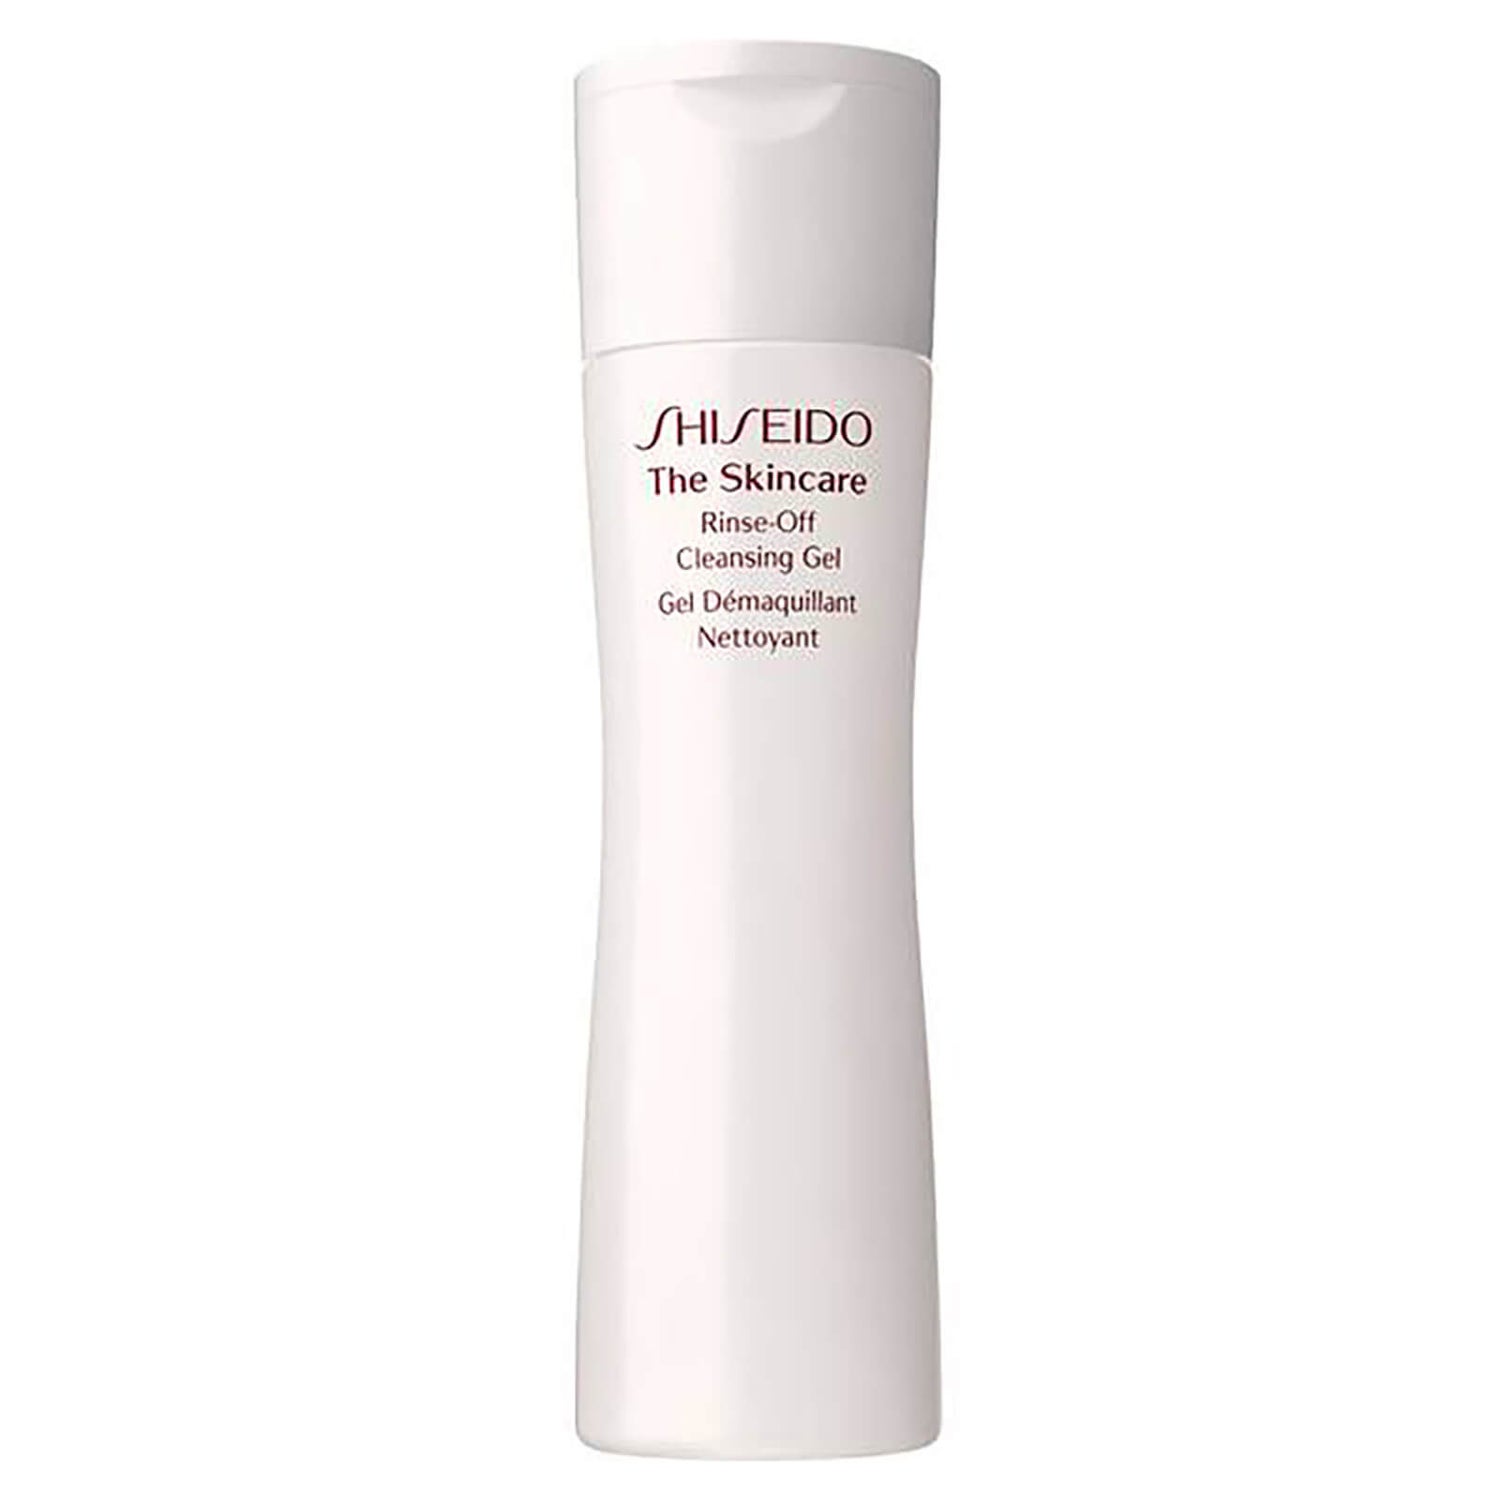 Shiseido The Skincare Essentials Rinse-Off Cleansing Gel (200ml)